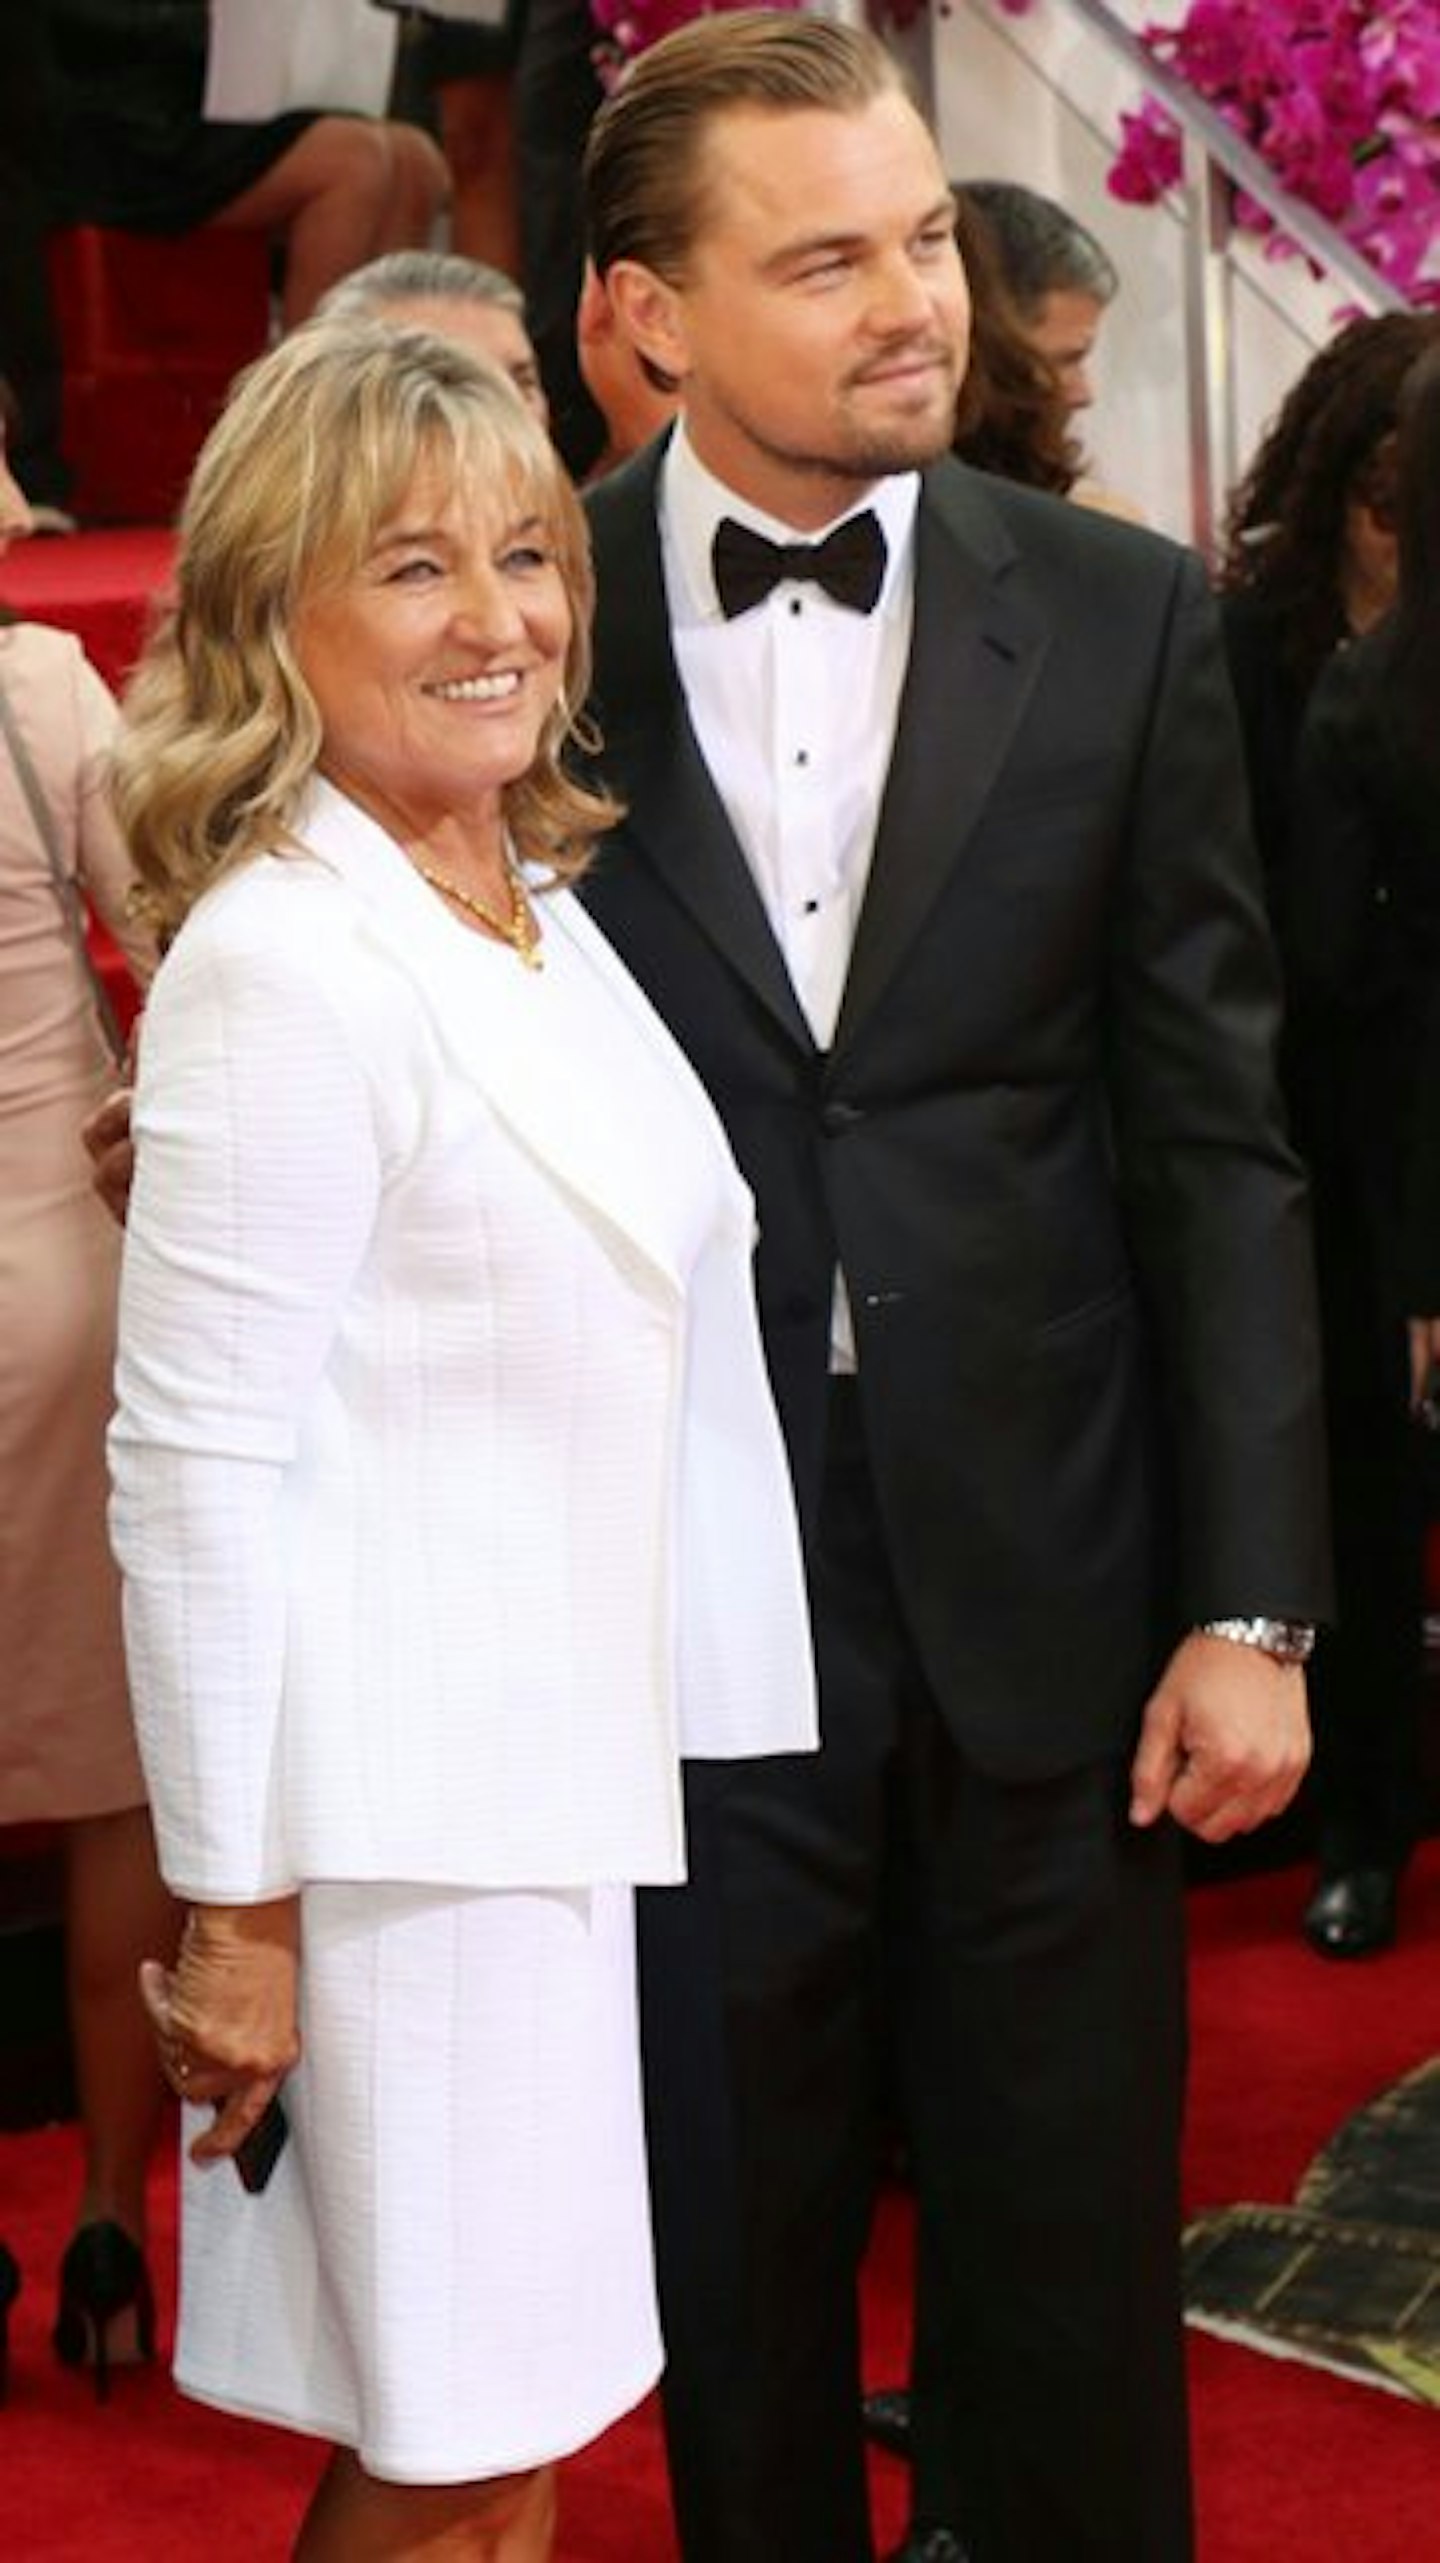 Leo brought his mum along to the Golden Globes.